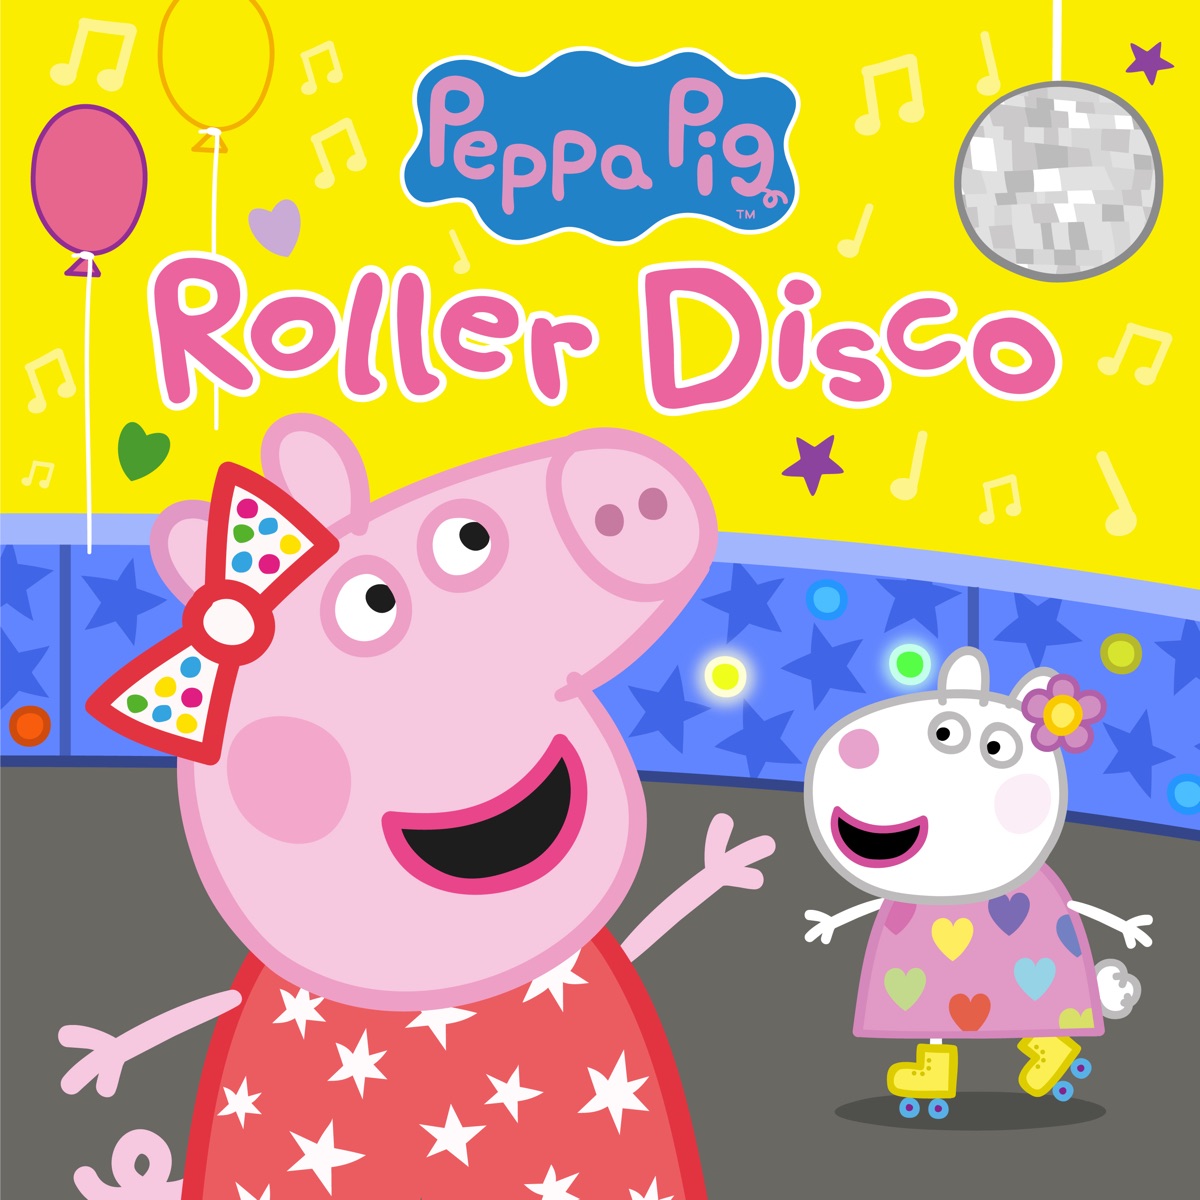 Roller Disco - Single by Peppa Pig on Apple Music